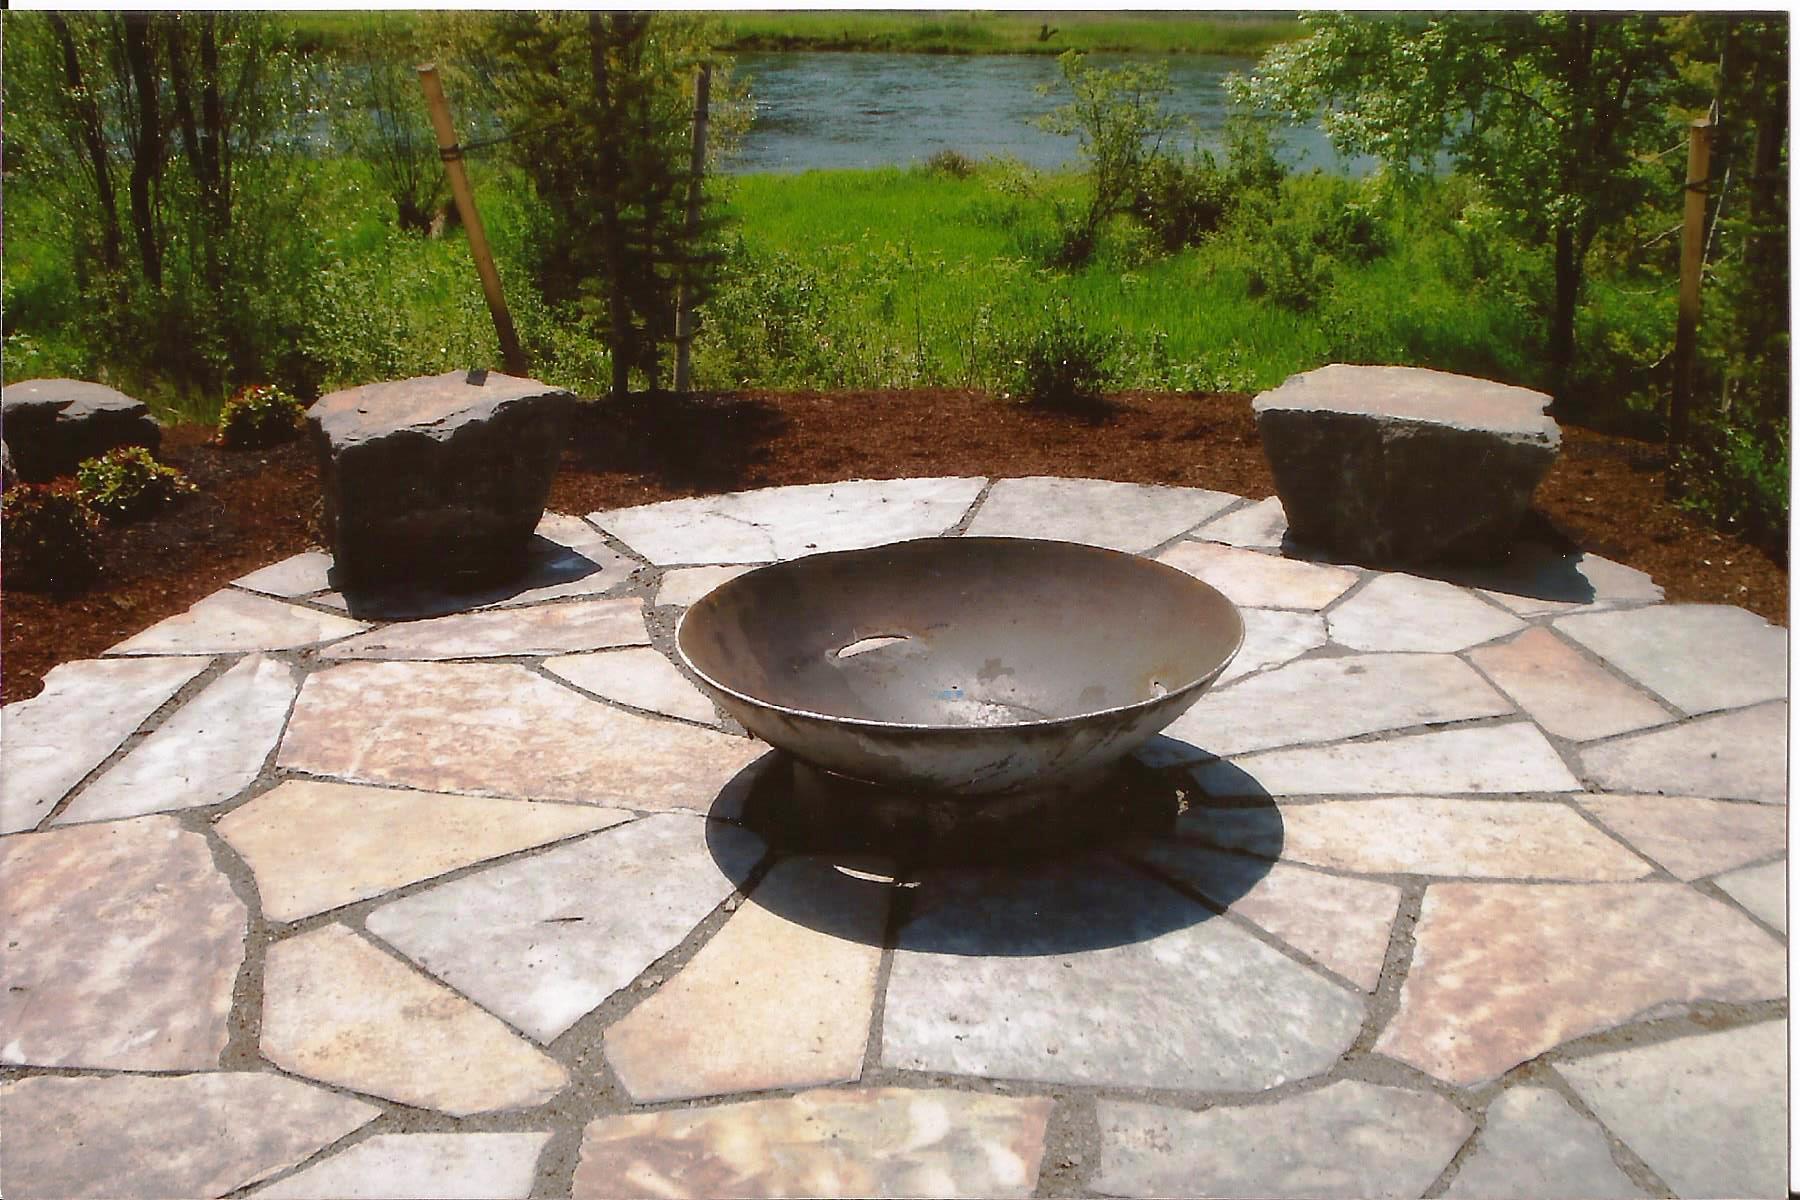 Image of a beautiful round paver patio with a fire pit in the middle, surrounded by a well-landscaped garden.